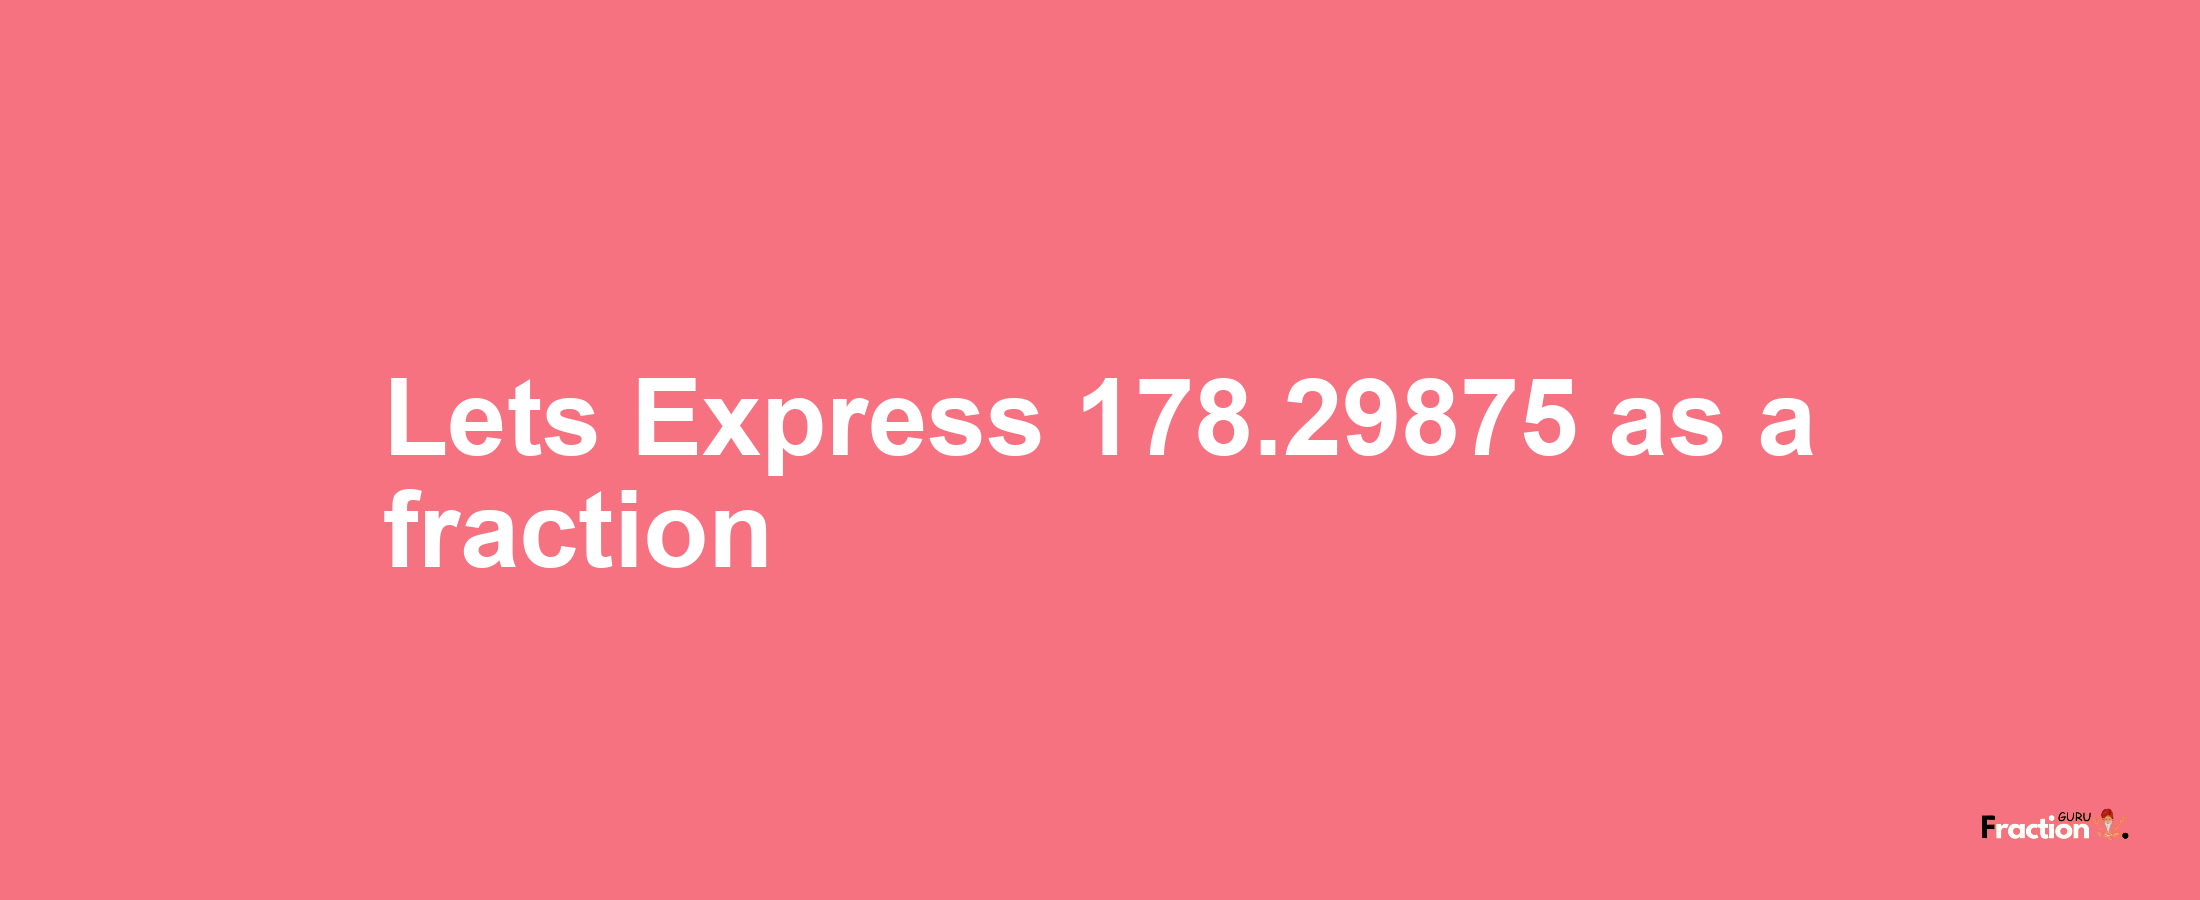 Lets Express 178.29875 as afraction